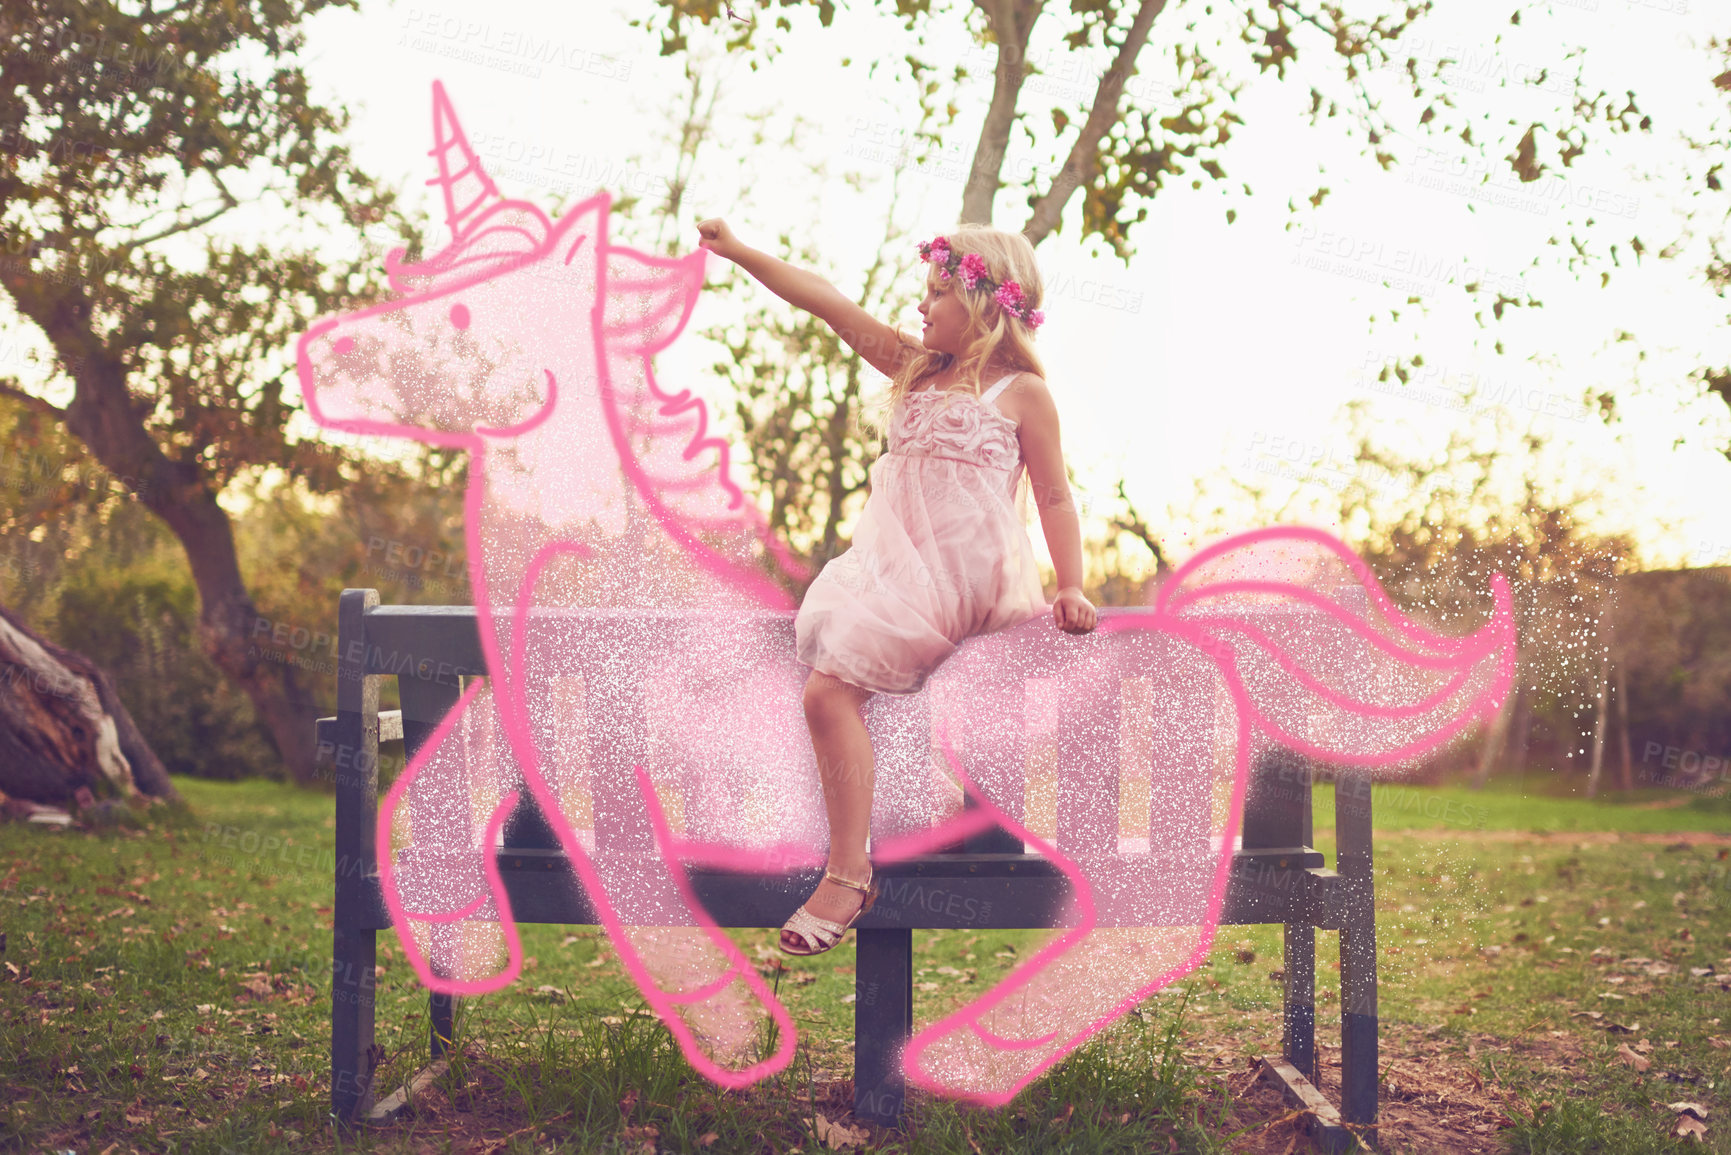 Buy stock photo Shot an adorable little girl riding a pink toy unicorn outdoors